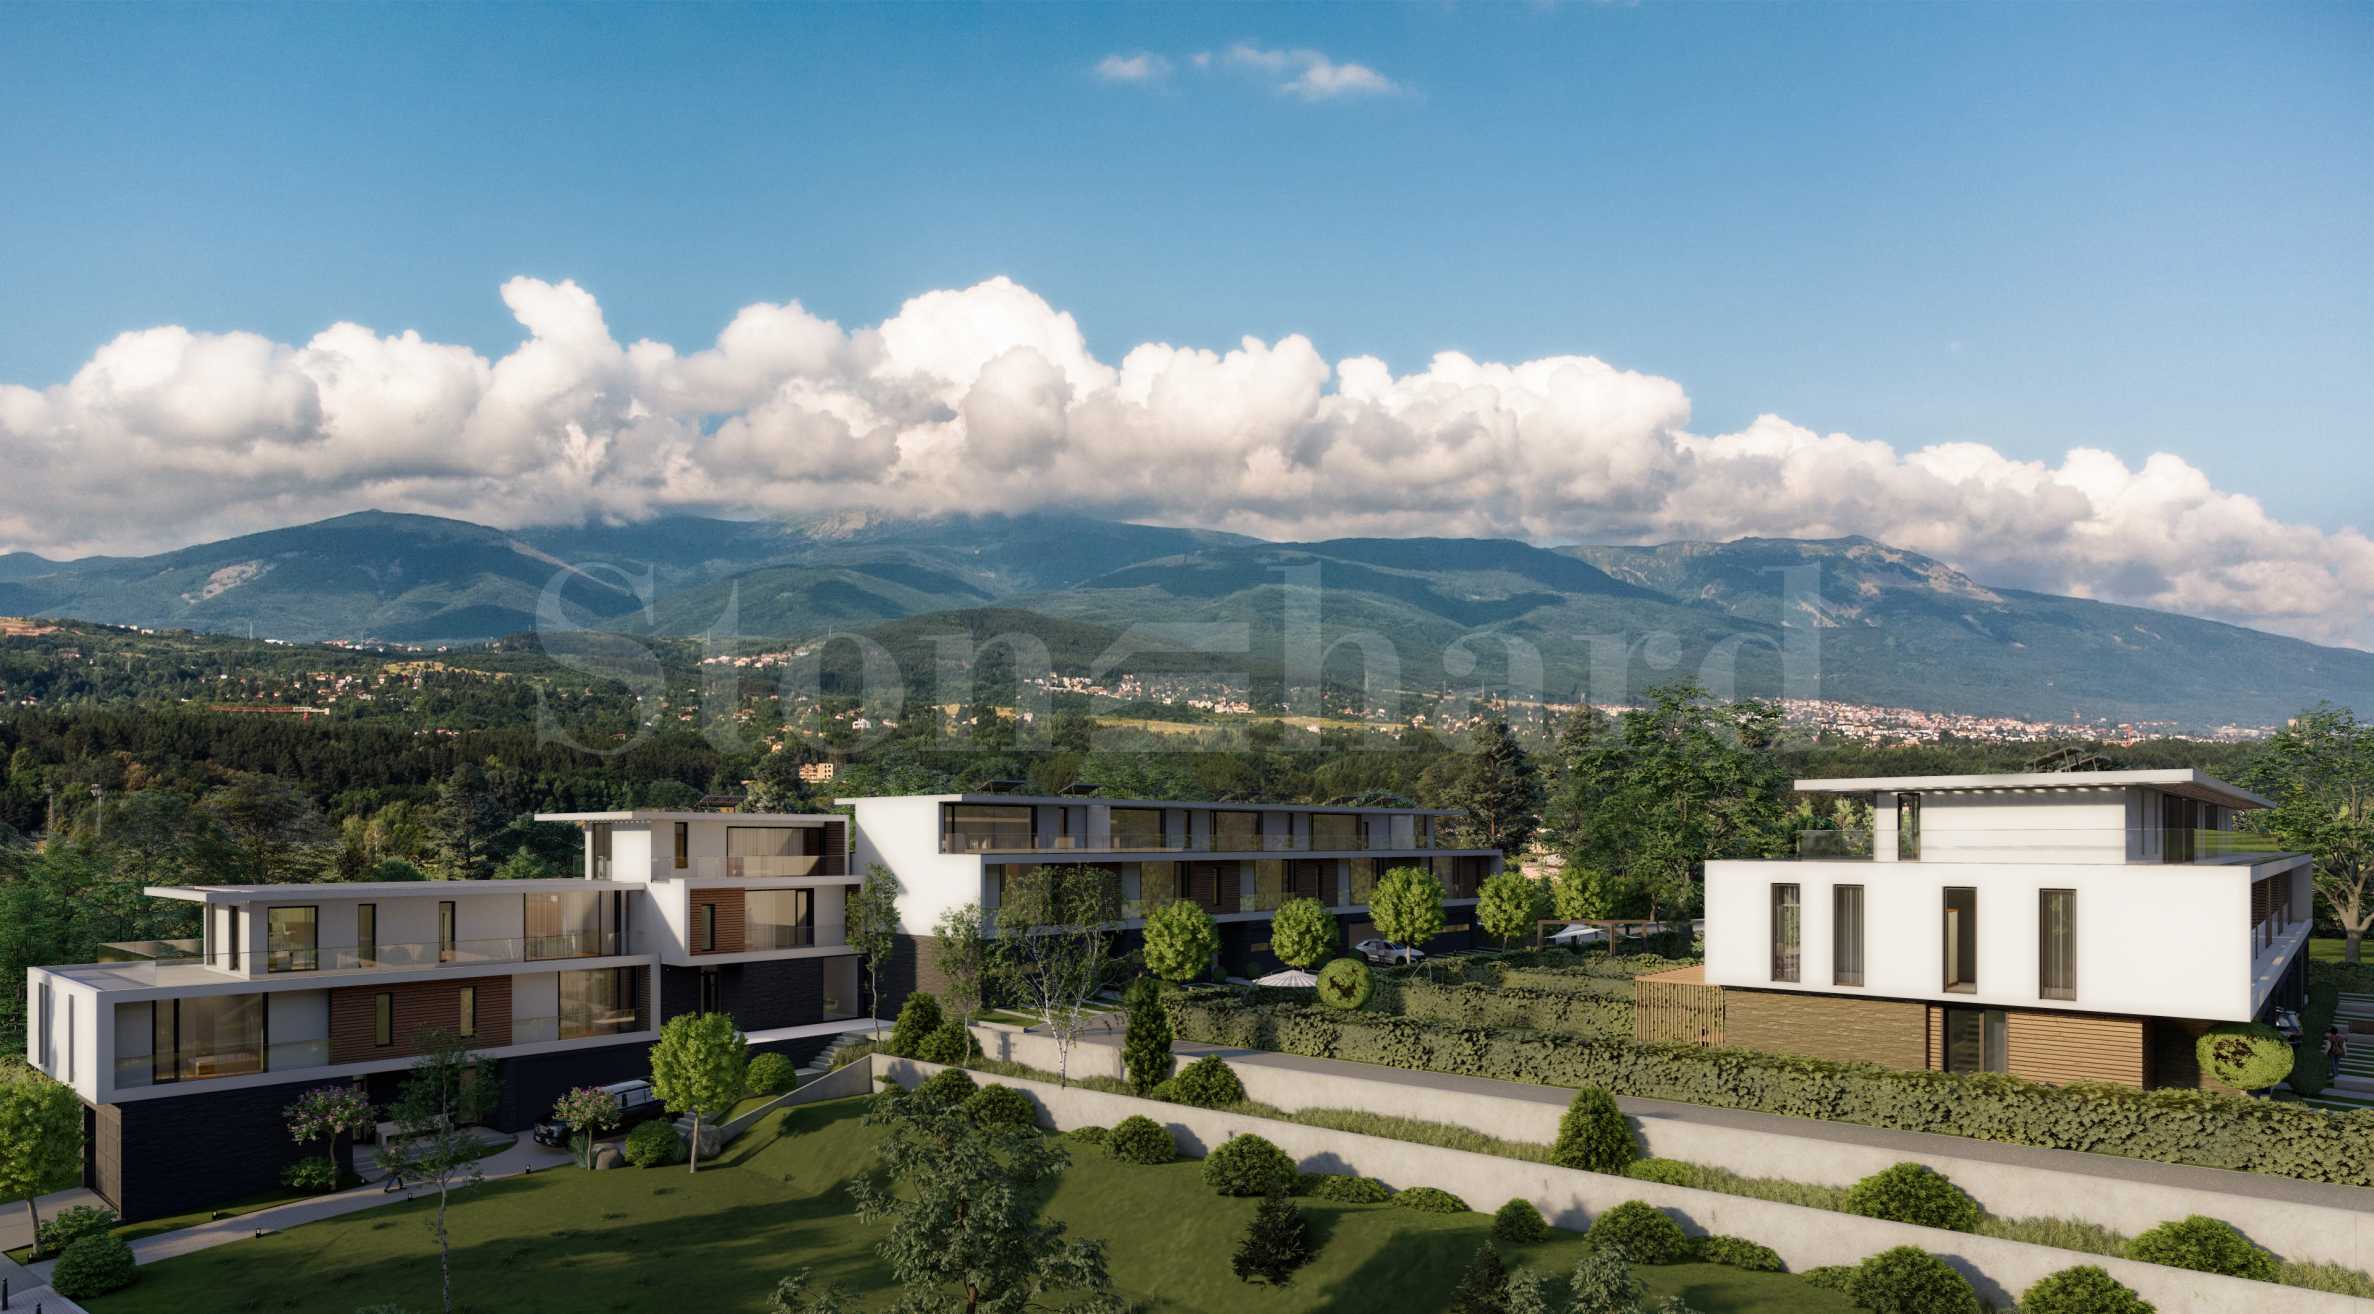 Aria Park Villas - a complex of terraced houses with beautiful views in the area of Pancharevo lake1 - Stonehard